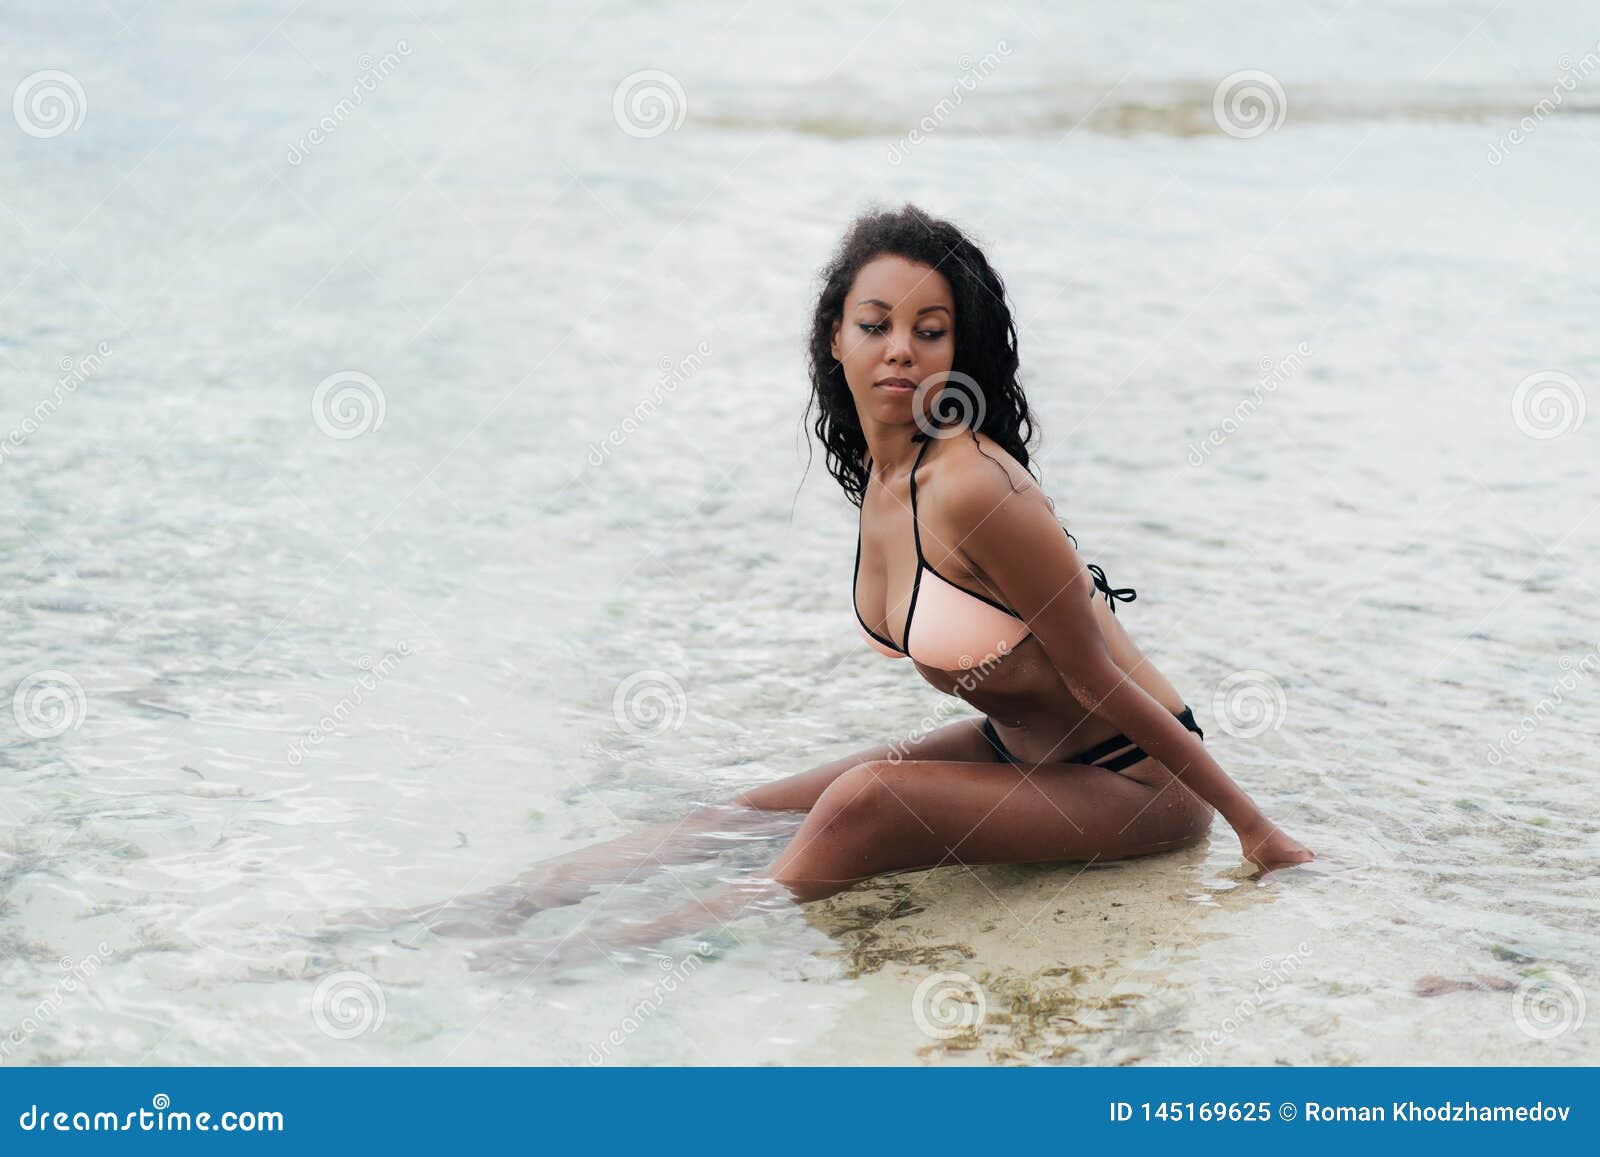 big breasts beach" Young Sexy Woman With Nude Big Breasts On A Sandy Beach ...